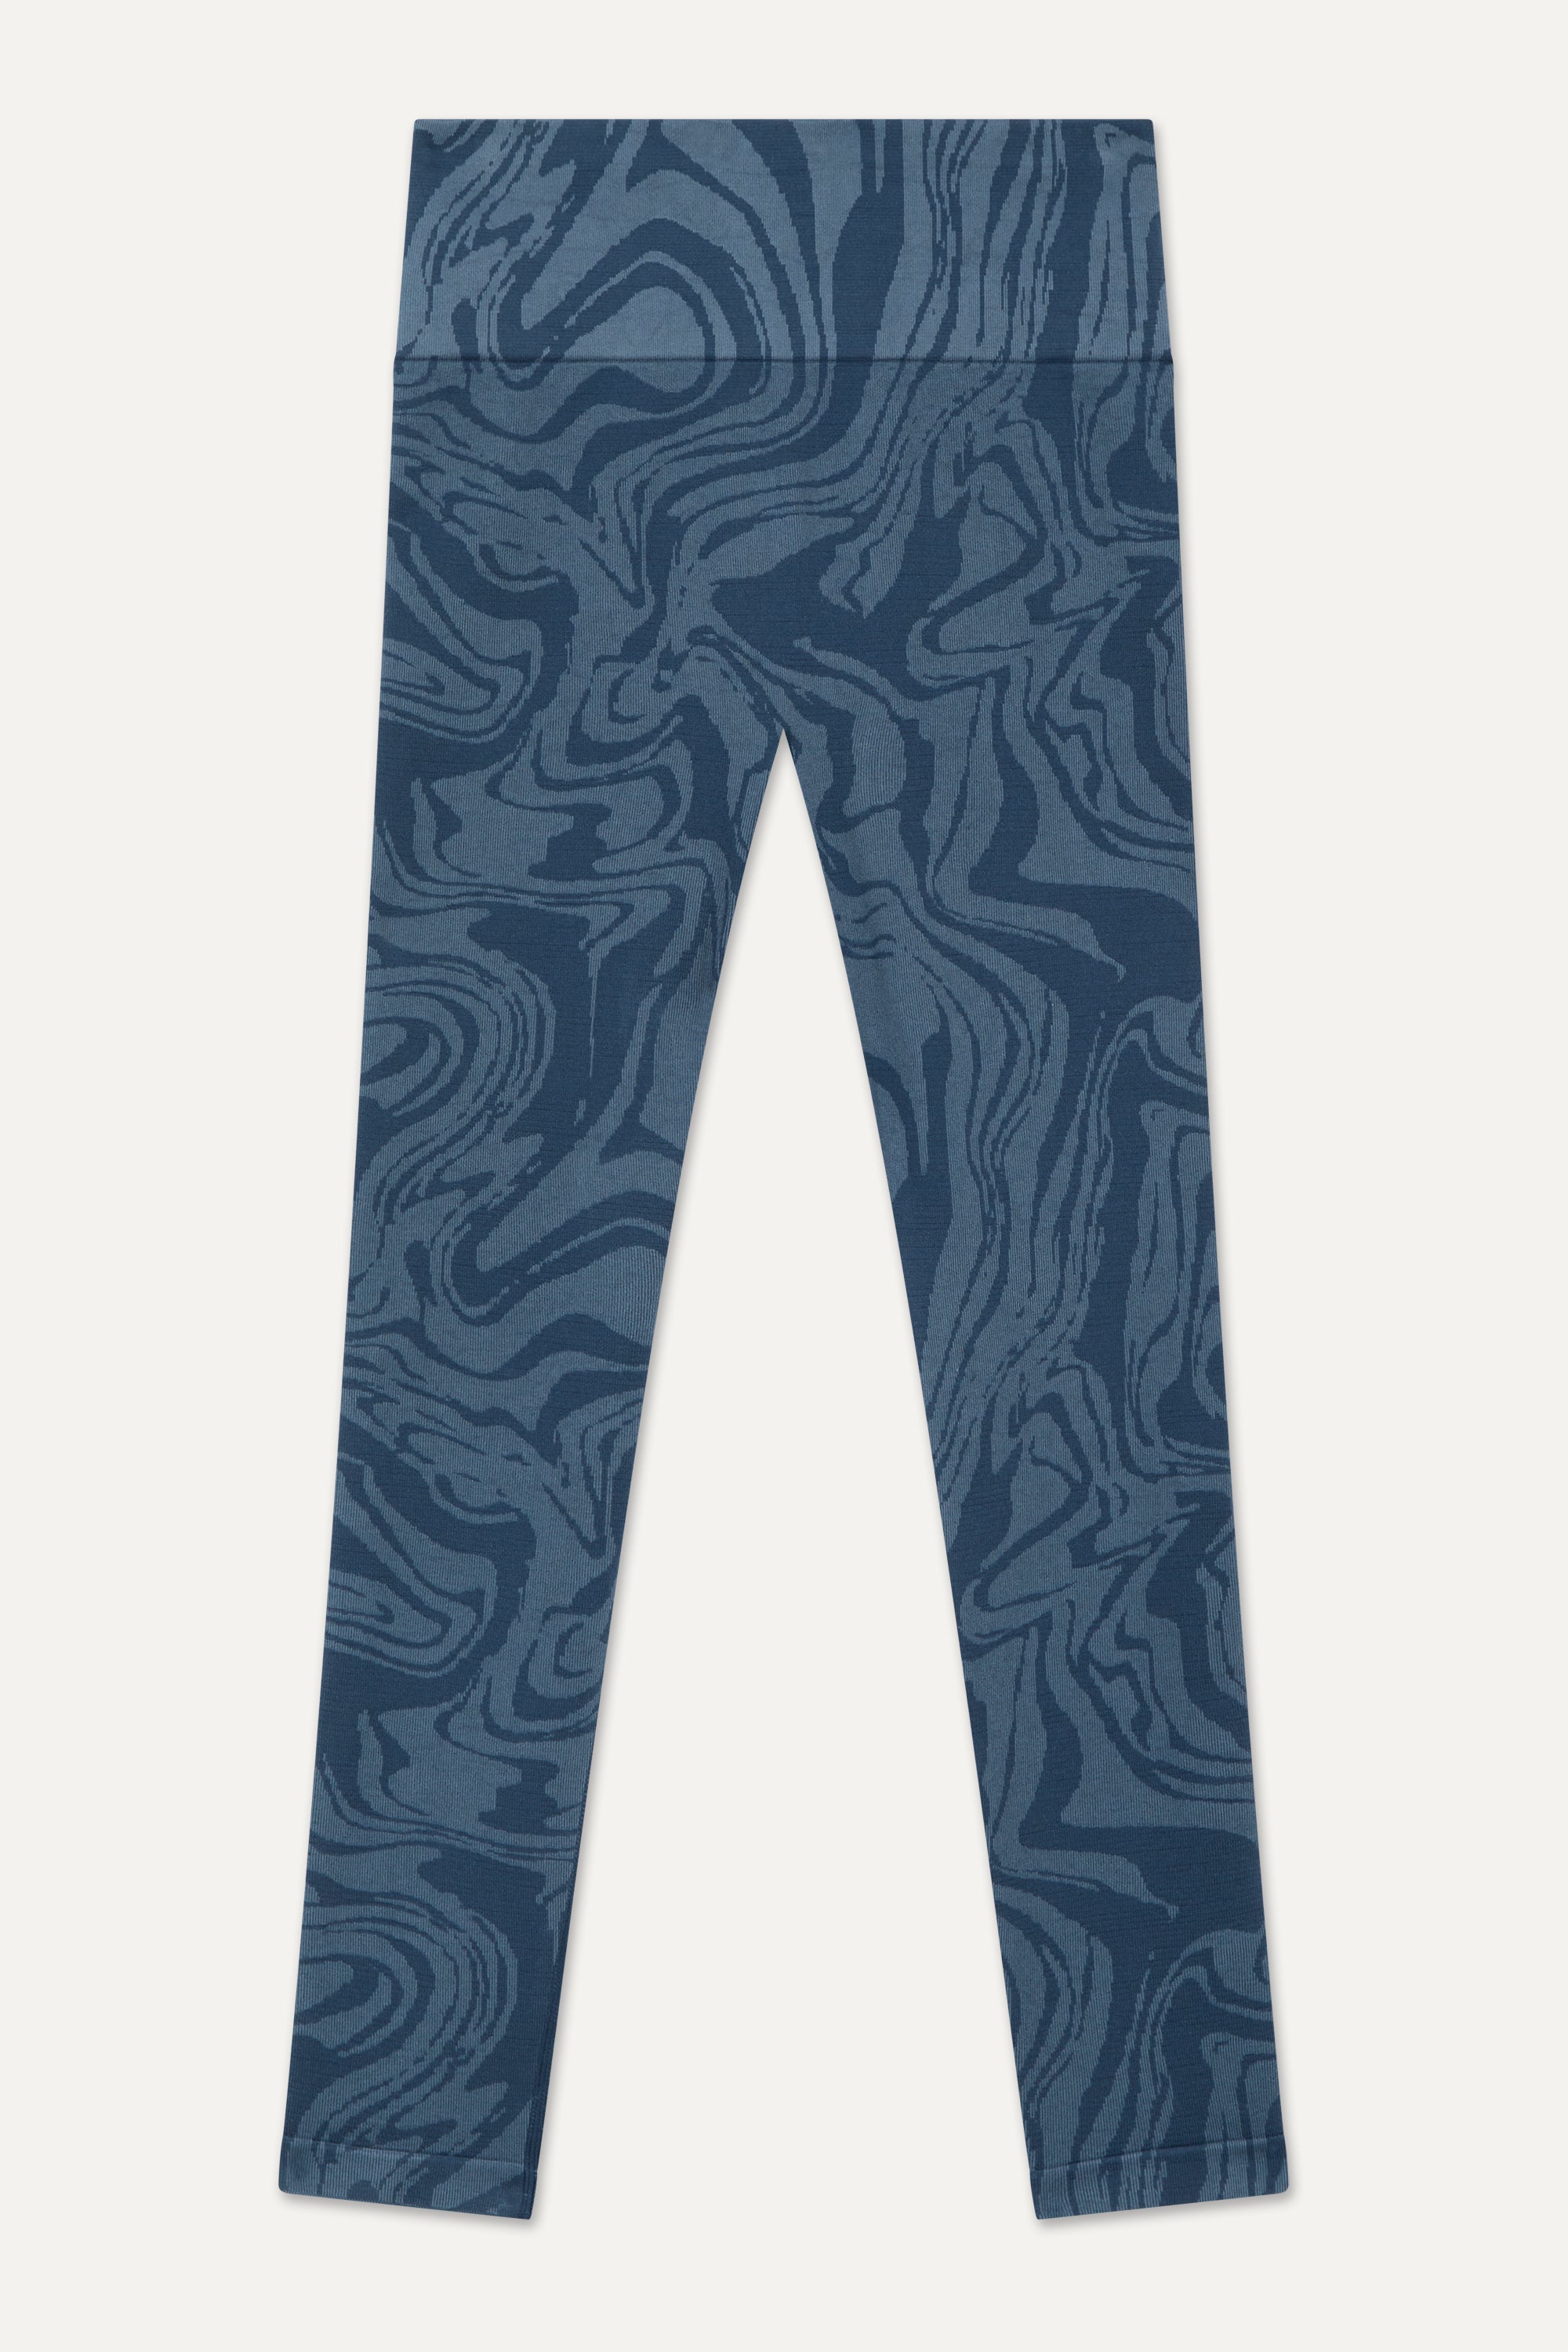 Denim blue recycled seamless marble jacquard print full length high rise sculpting compressive leggings for yoga, pilates, barre, spinning, running, cycling and exercise by sustainable activewear brand Jilla Active  Edit alt text